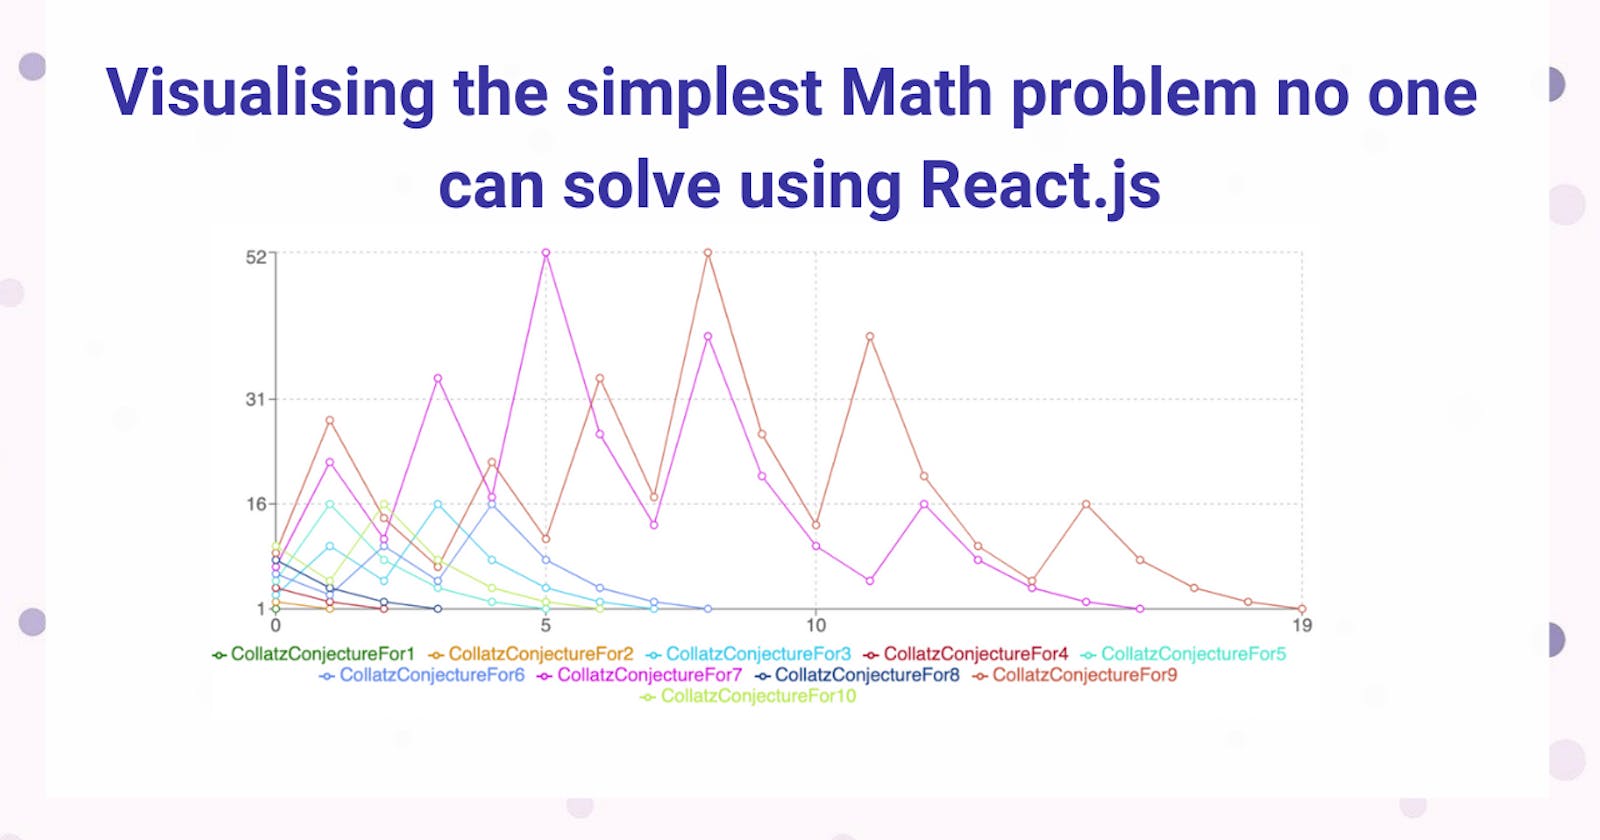 Visualising the simplest Math problem no one can solve using React.js